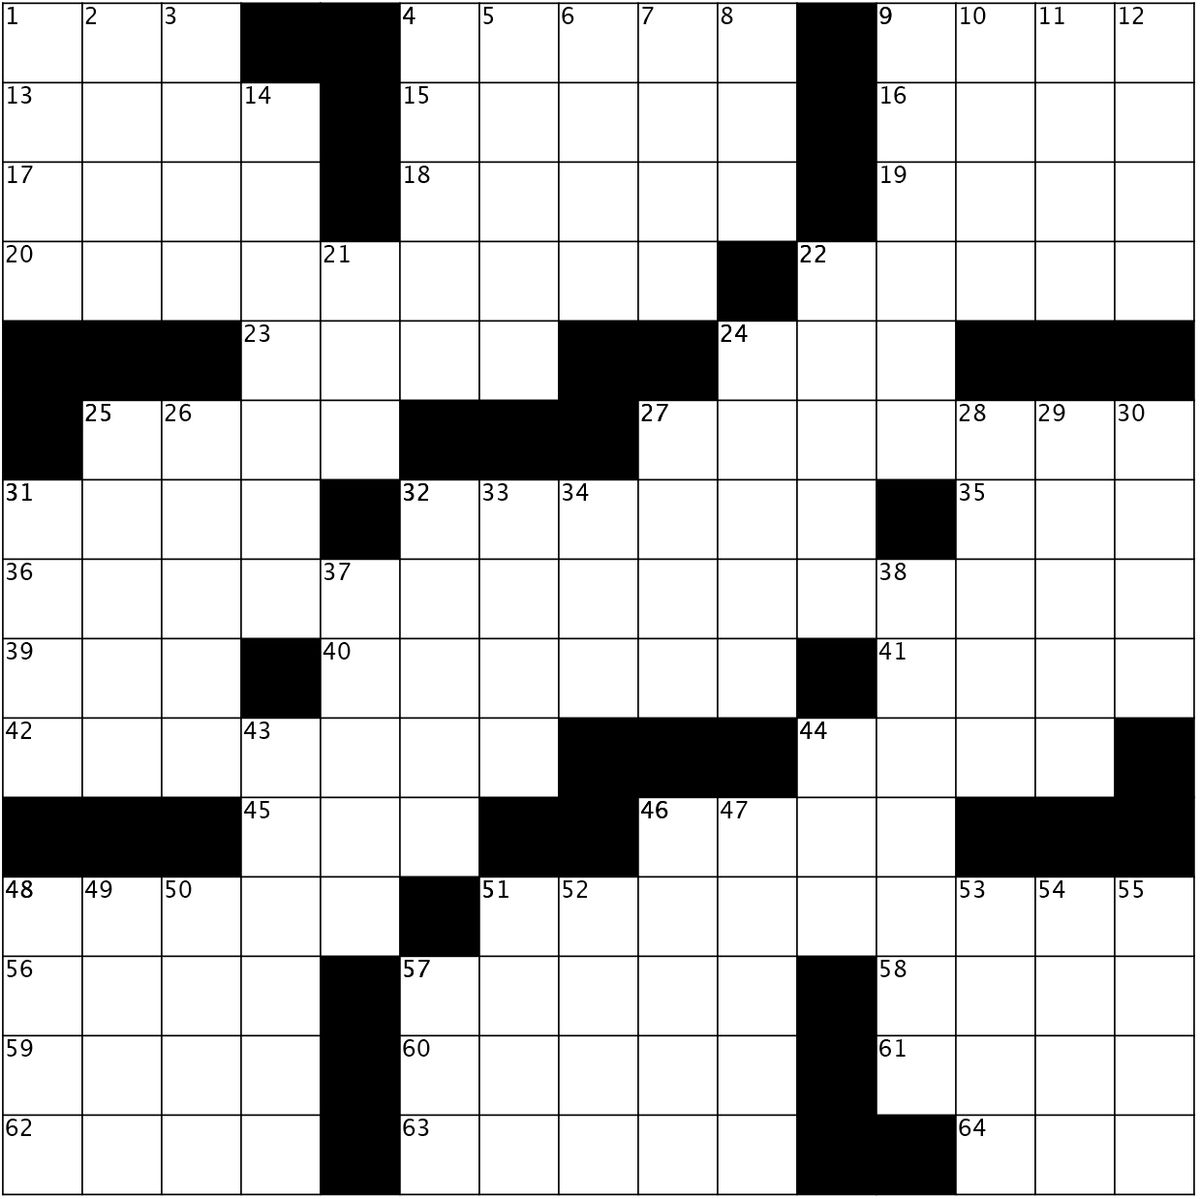 Click the puzzle for a full-size, interactive version.